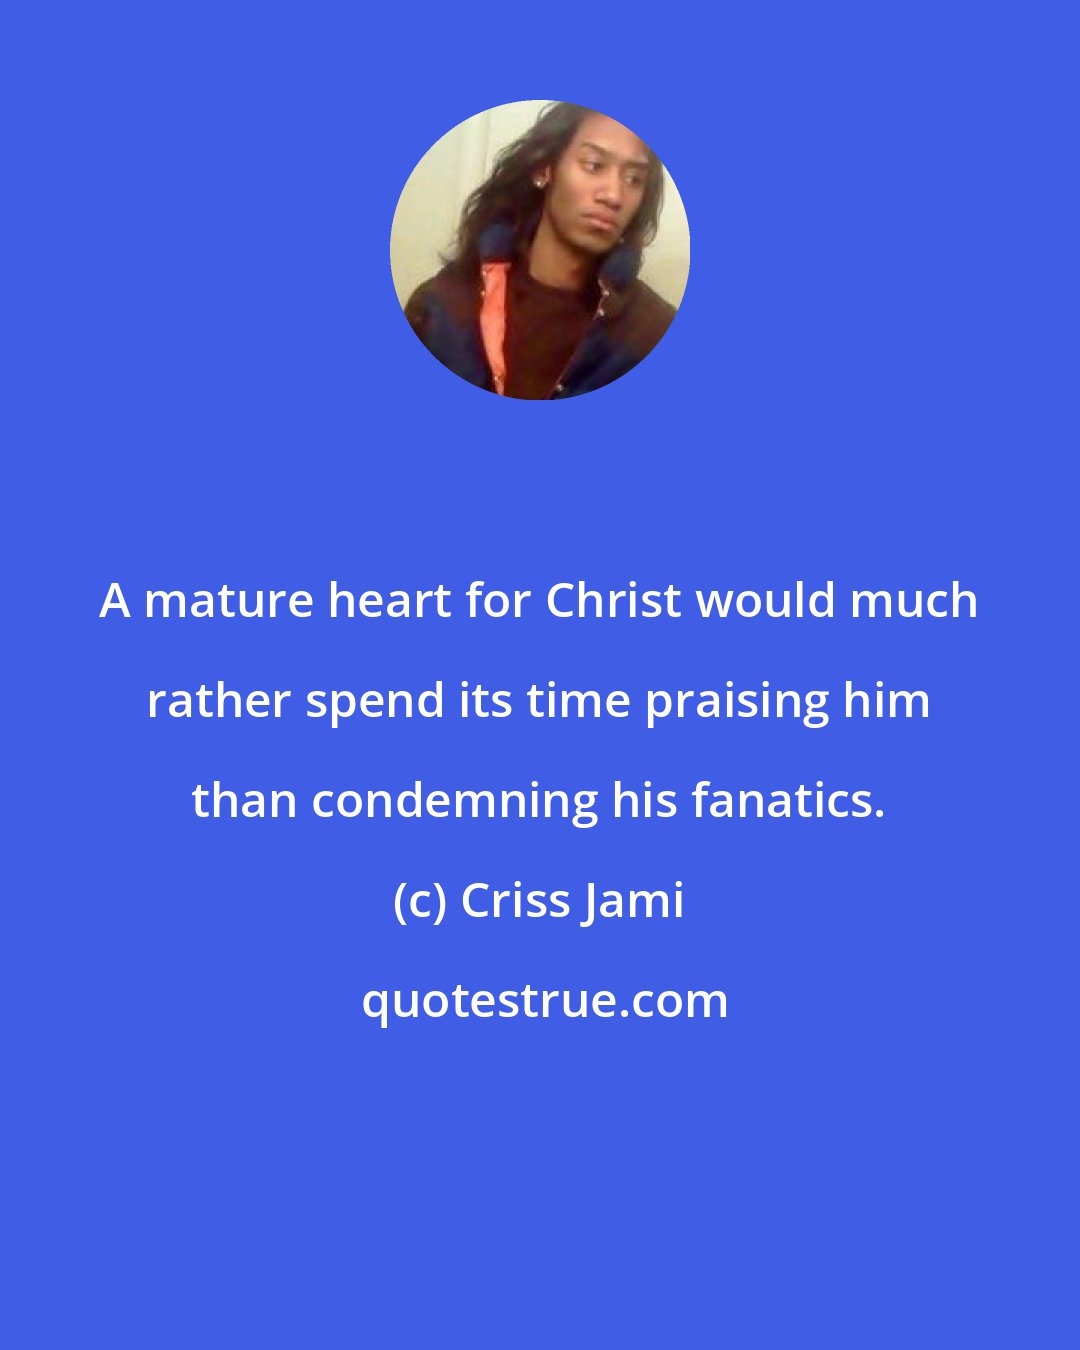 Criss Jami: A mature heart for Christ would much rather spend its time praising him than condemning his fanatics.